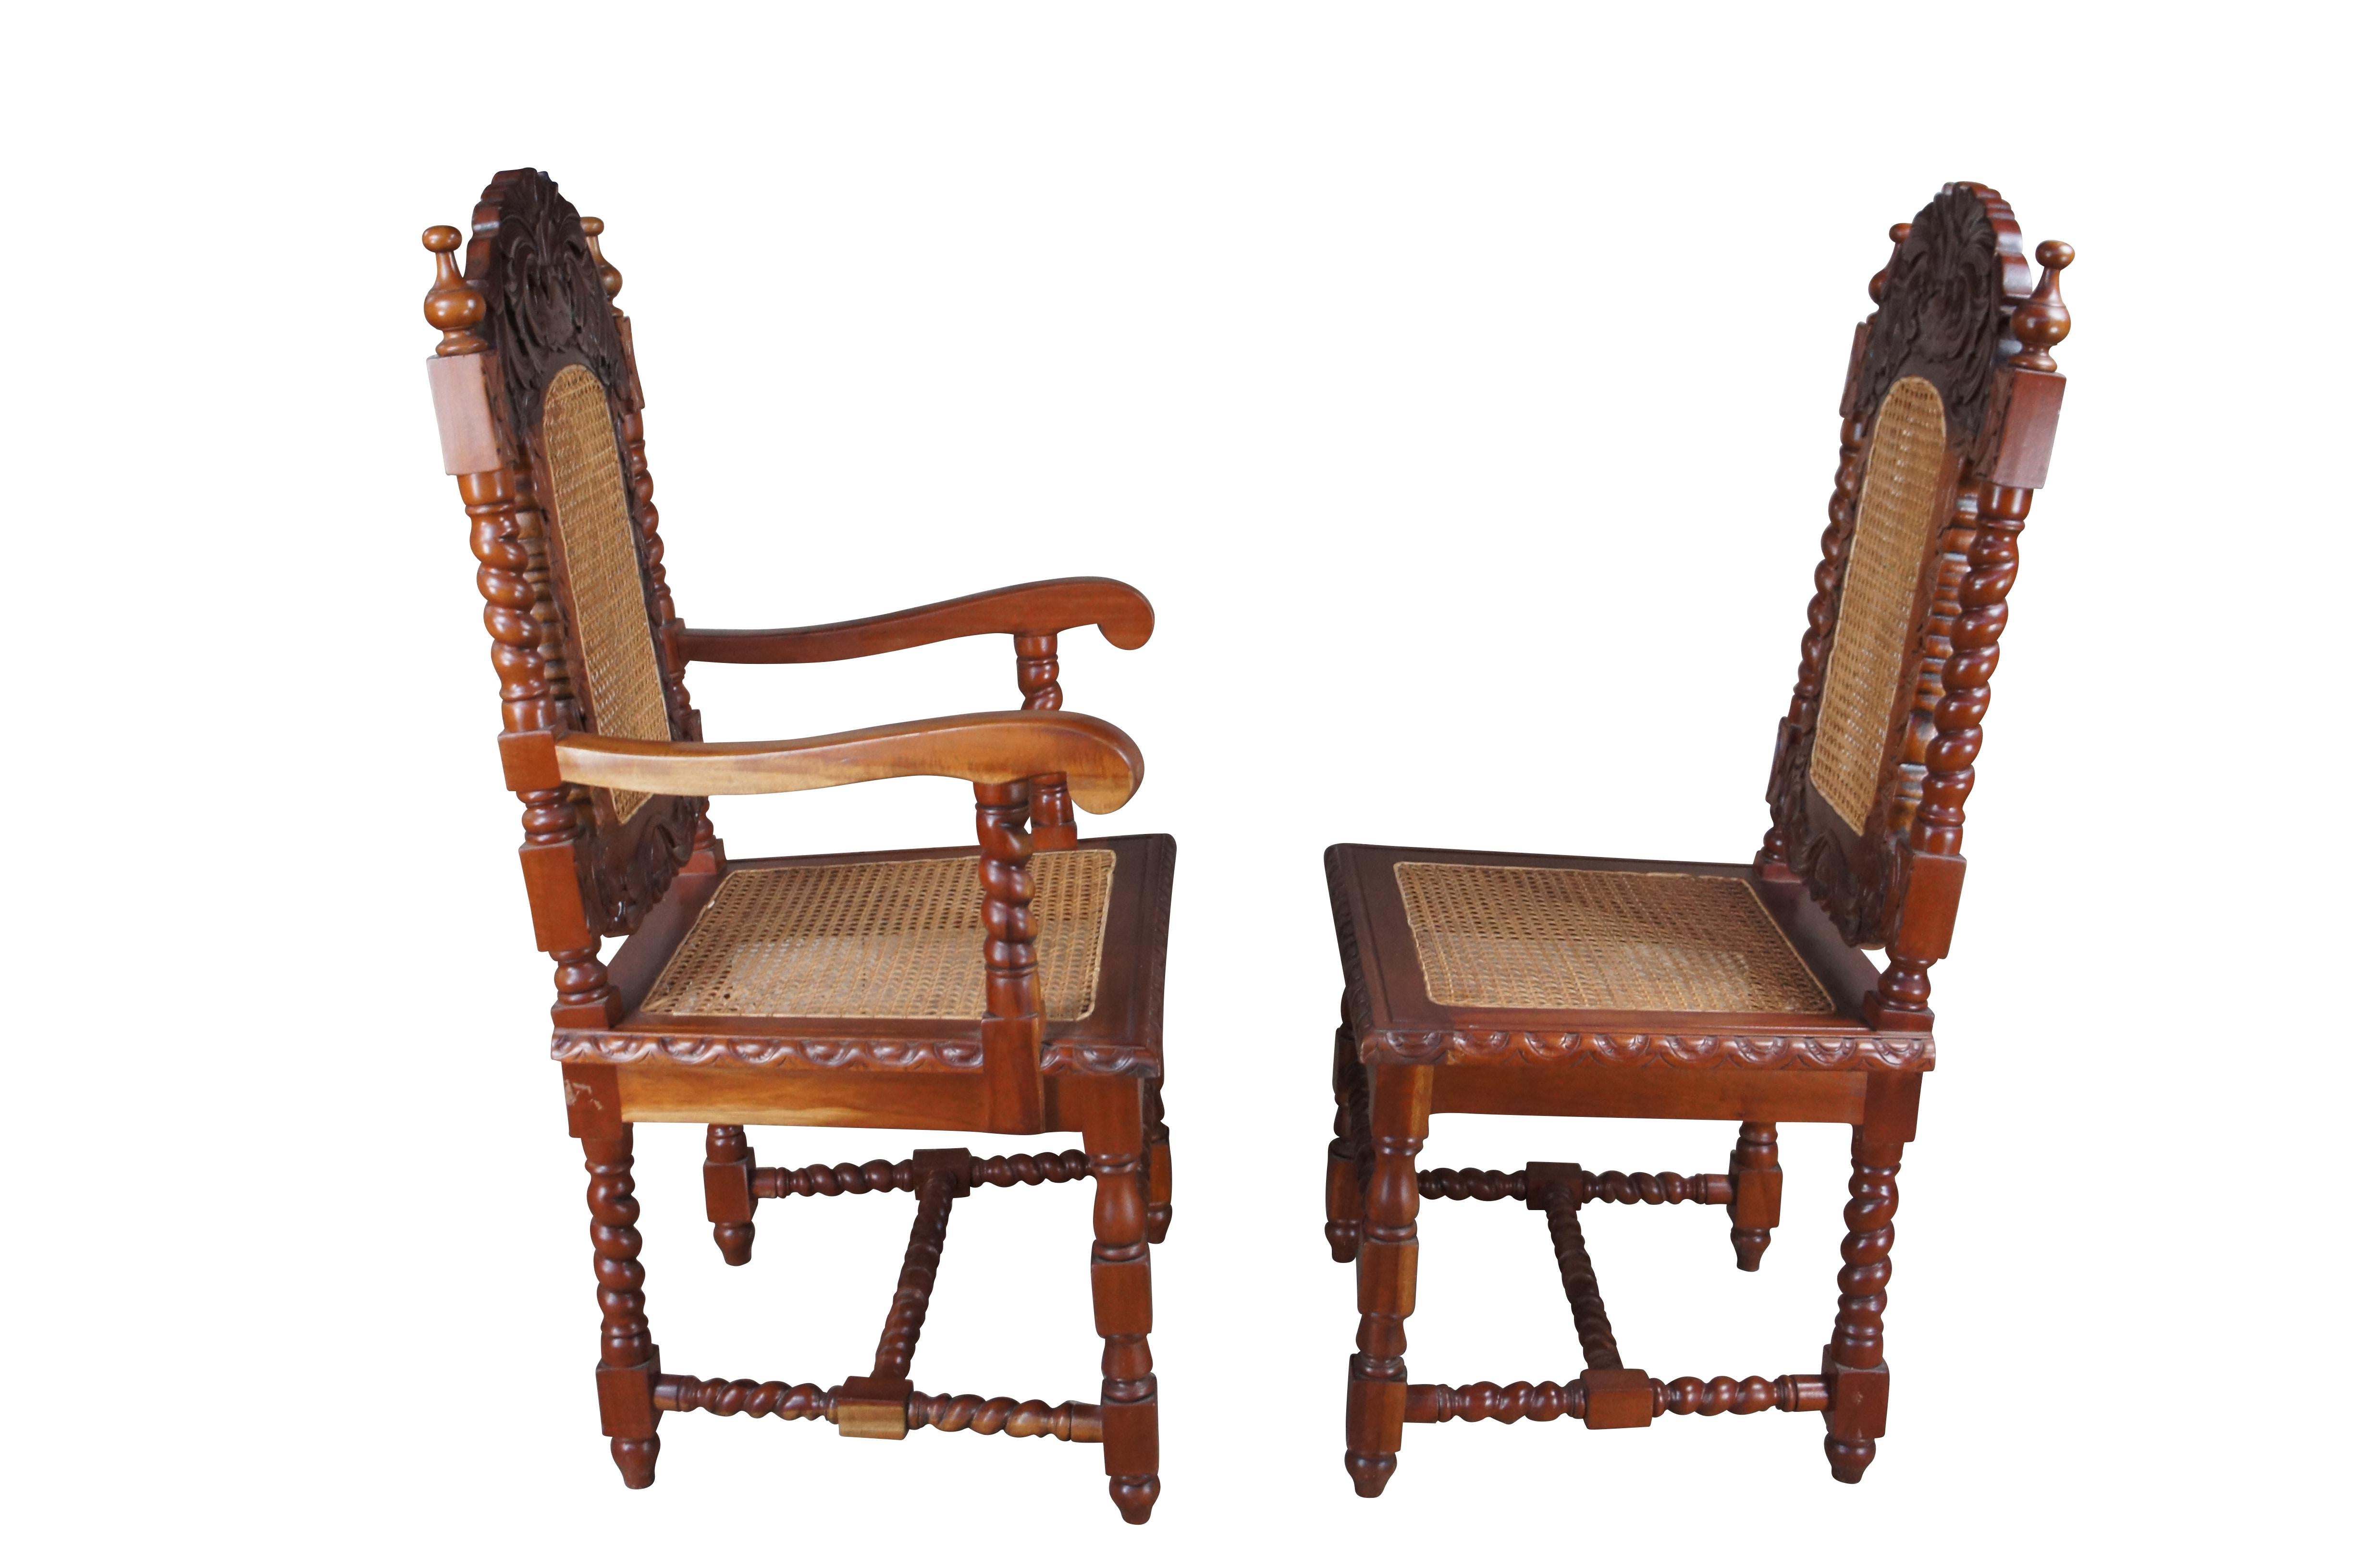 French Louis XIII dining arm and side chair. Made from mahogany with a carved and pierced acanthus foliate back with barley twist supports. Features a double cane back and cane seat. Legs are connected by an H stretcher with turnip feet. Made in